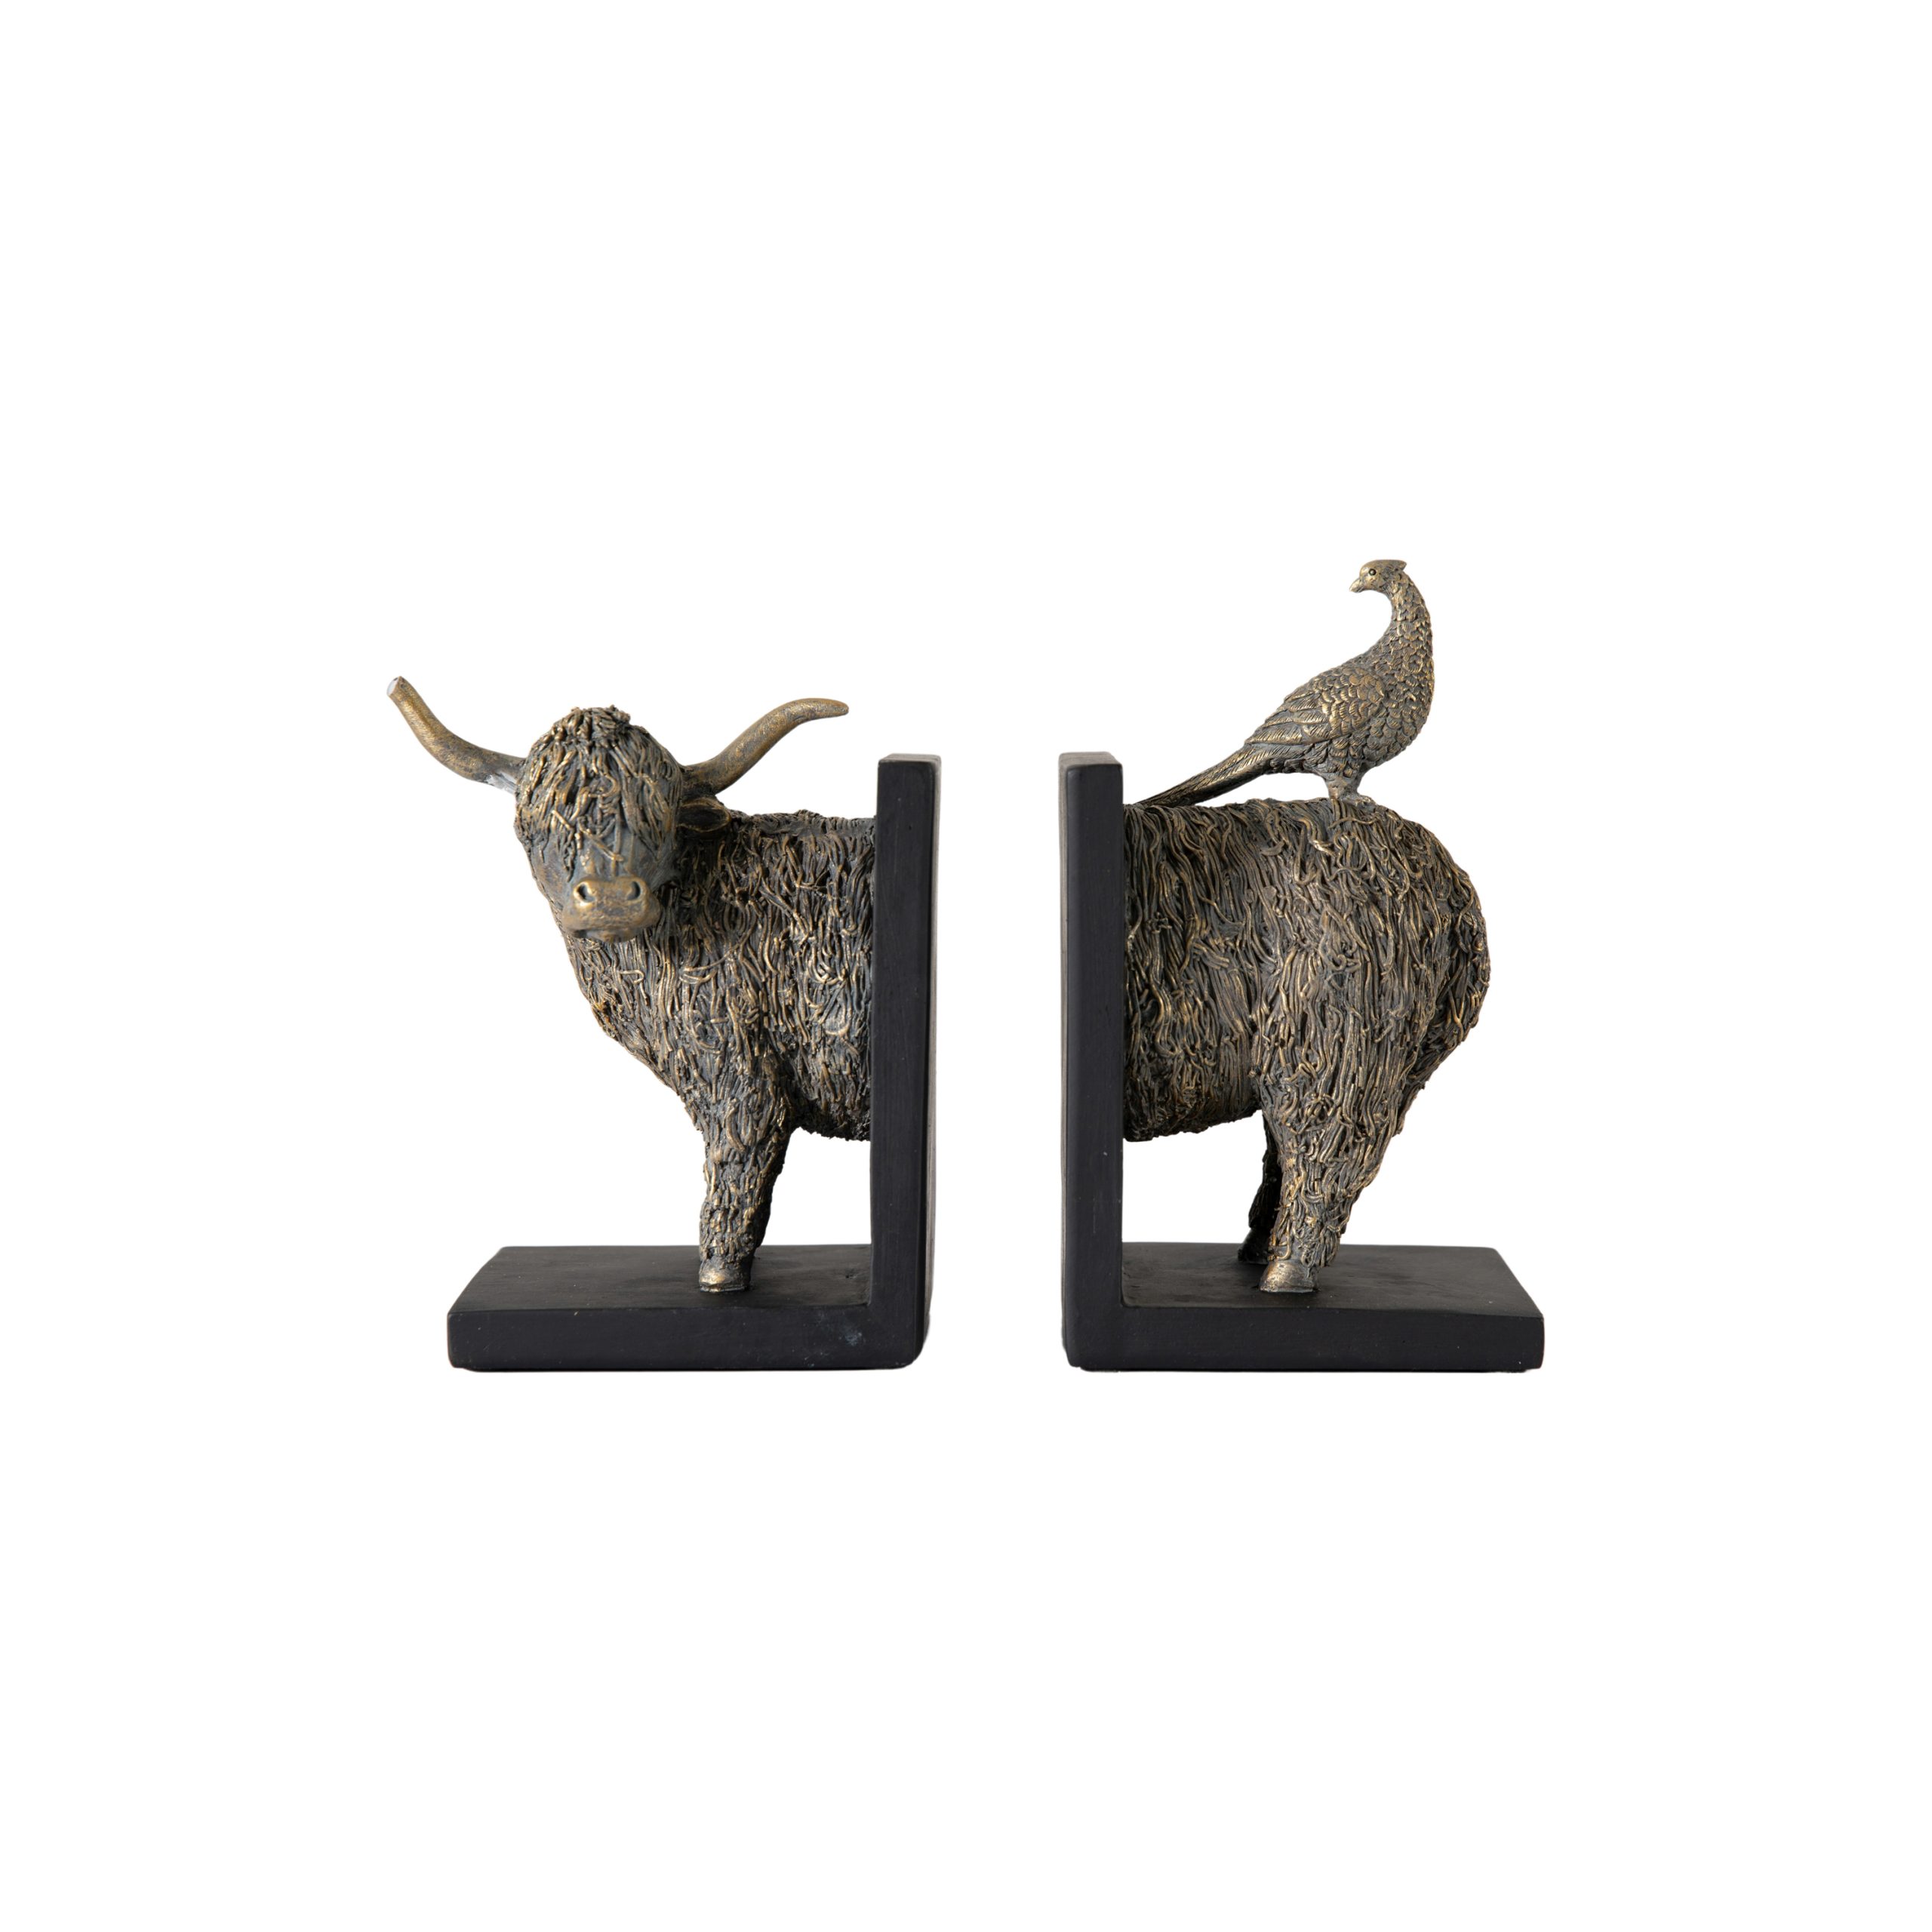 Gallery Direct Highland Cow Bookends (Set of 2)